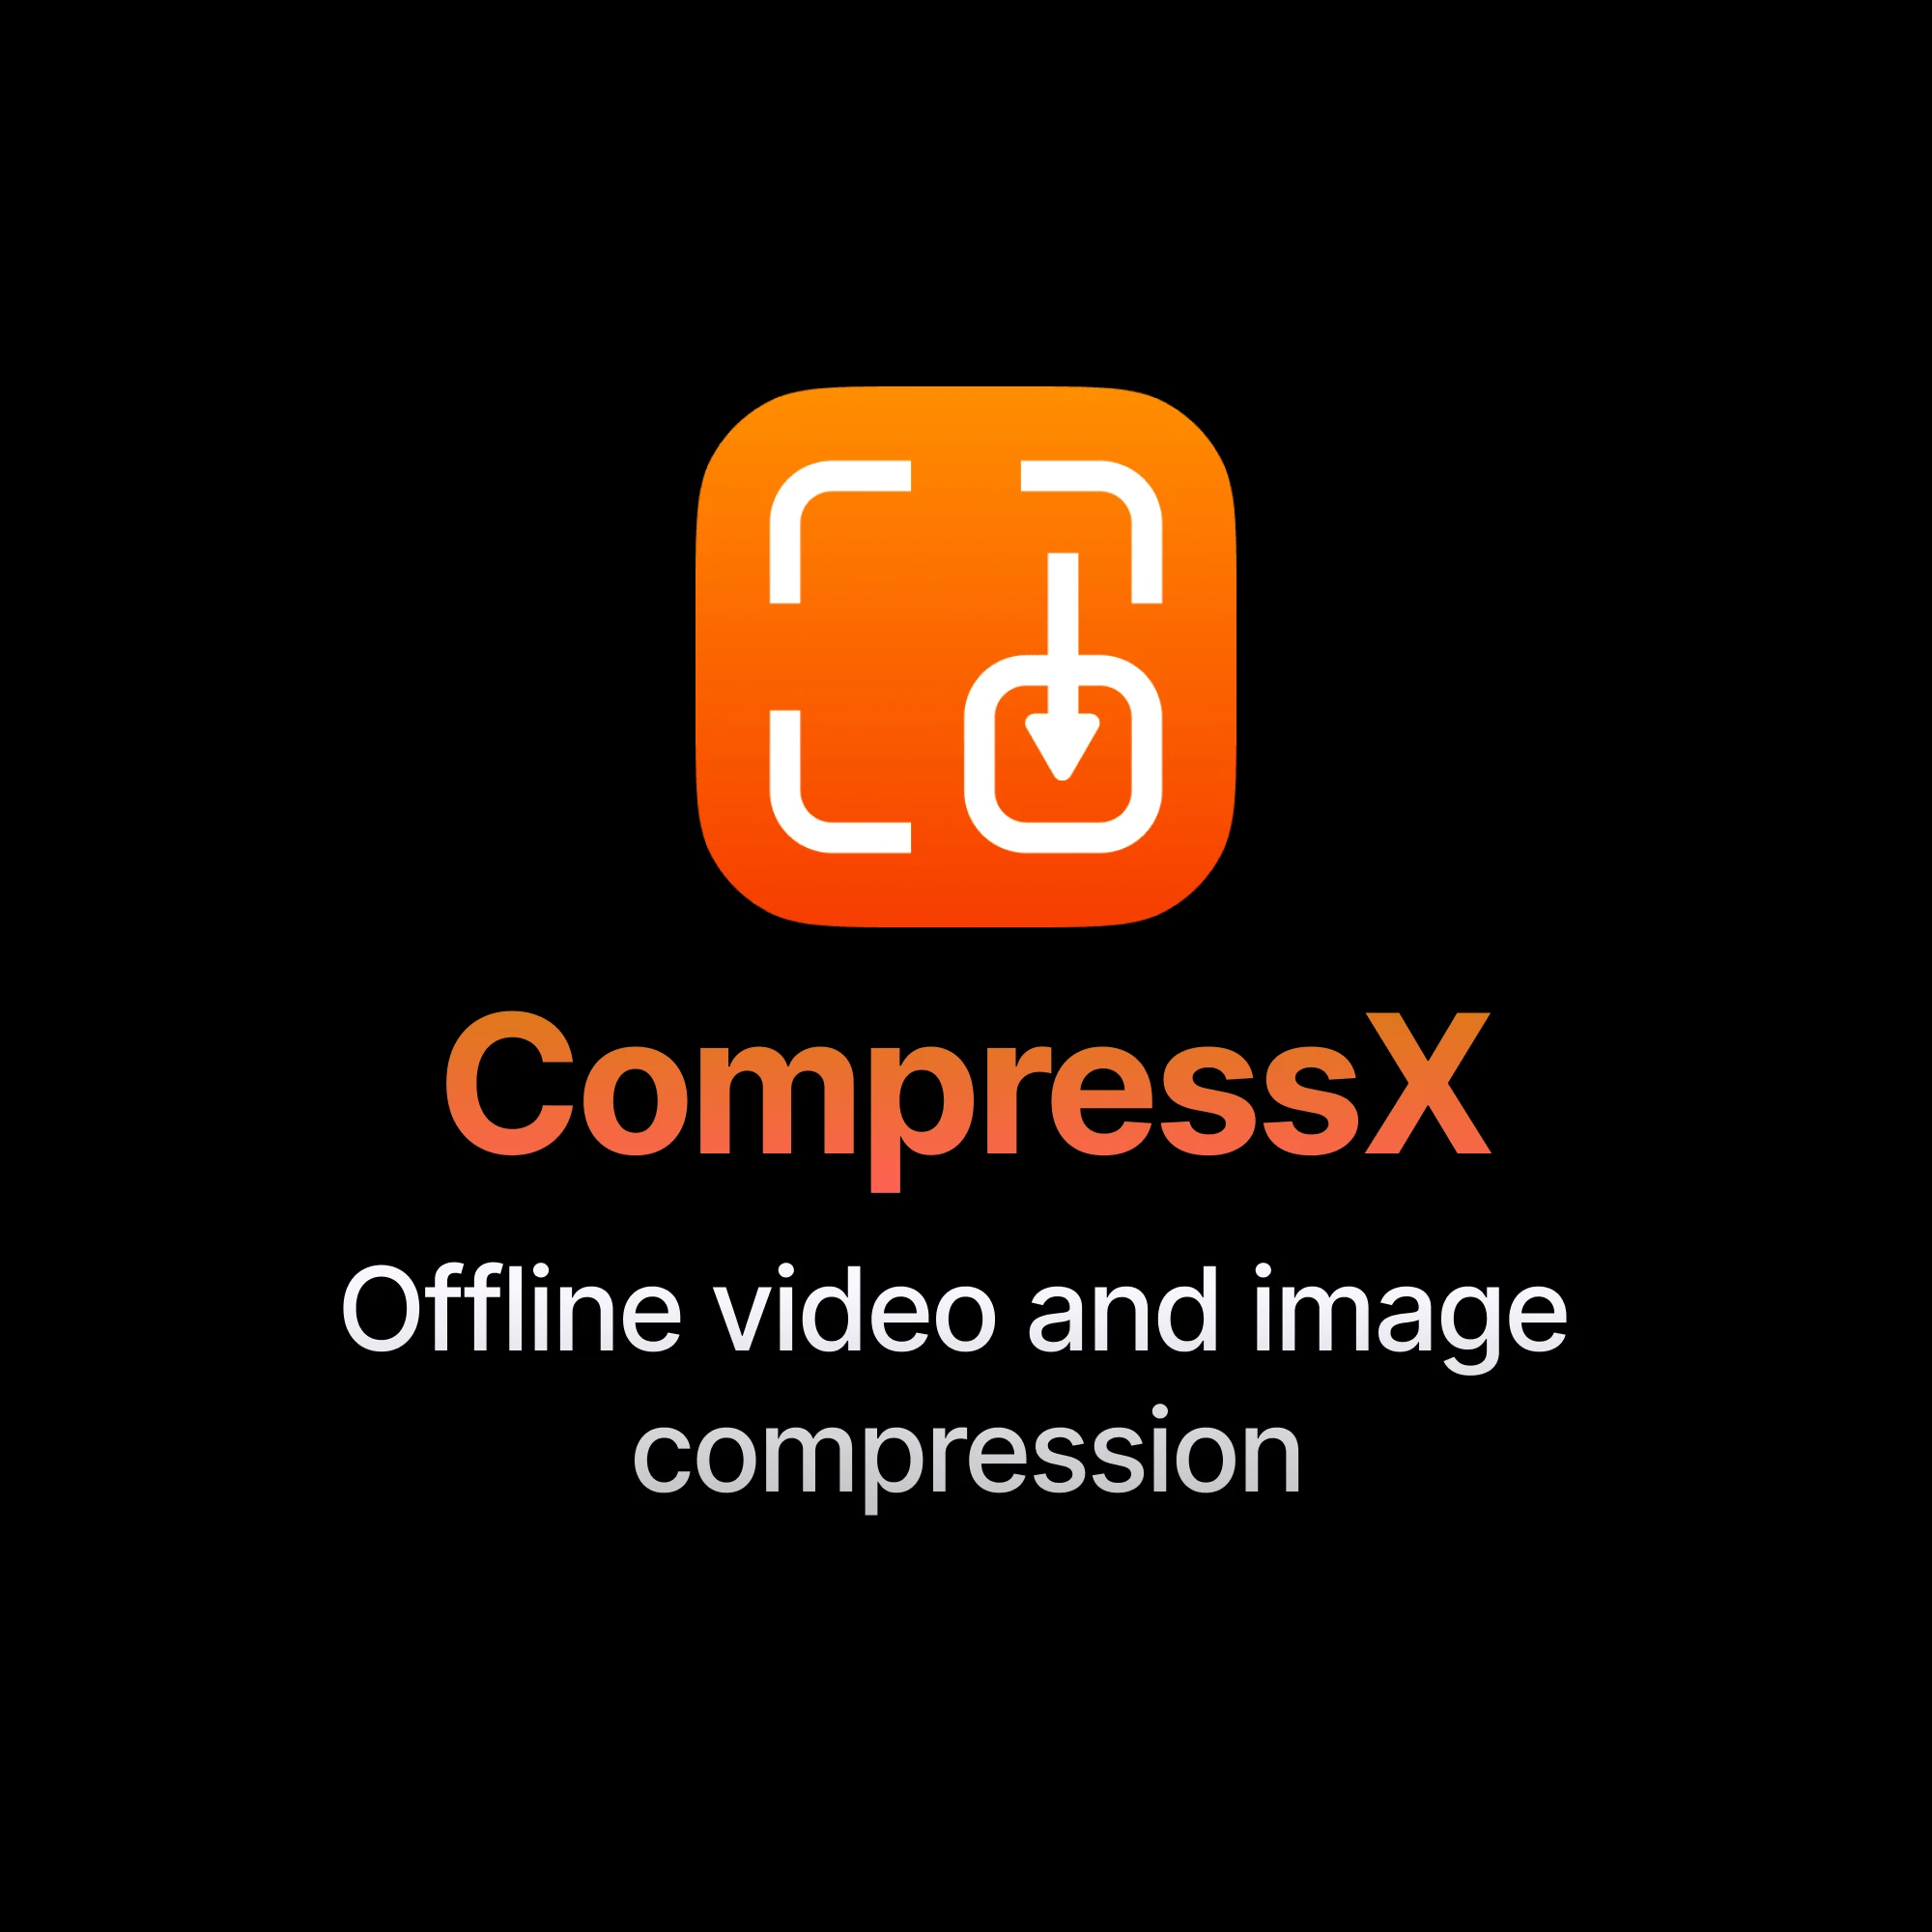 Compress video, image, and gif with up to 90% file size reduction without significant loss of quality.